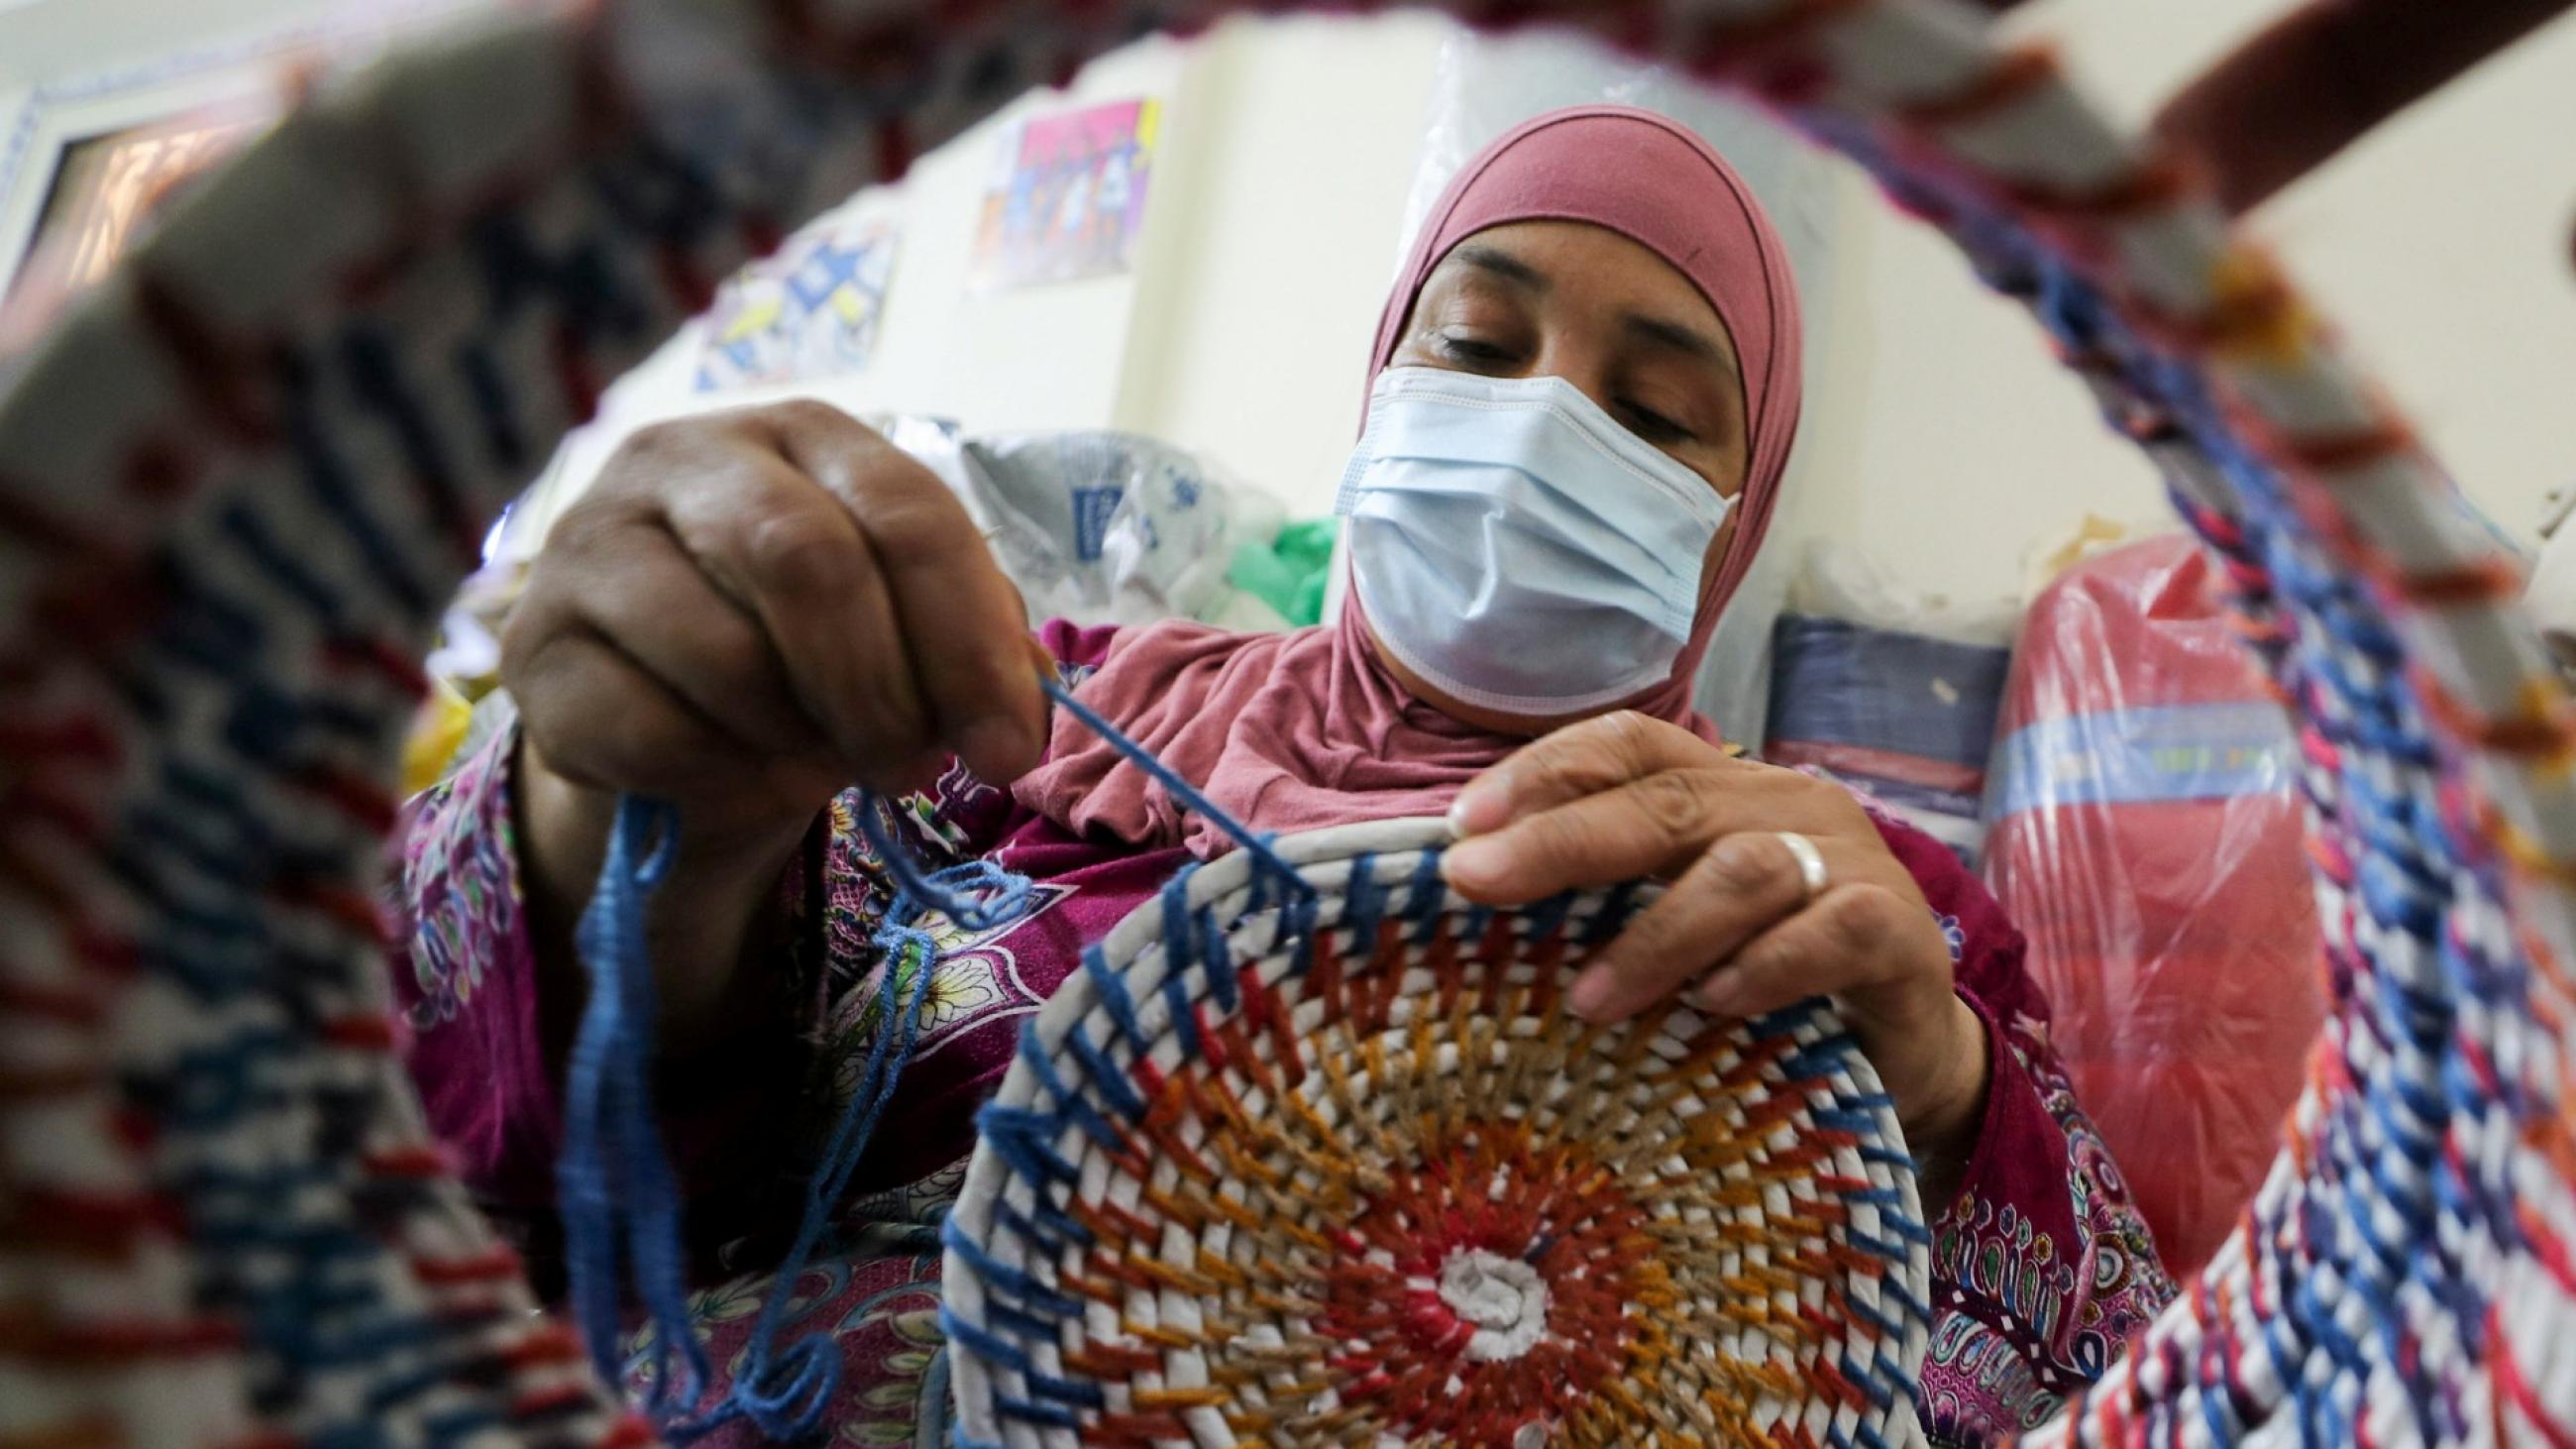 An Egyption woman wearing a pink headscarf a blue surgical mask is seen knitting a colorful bowl out of yarn made form recycled plastics